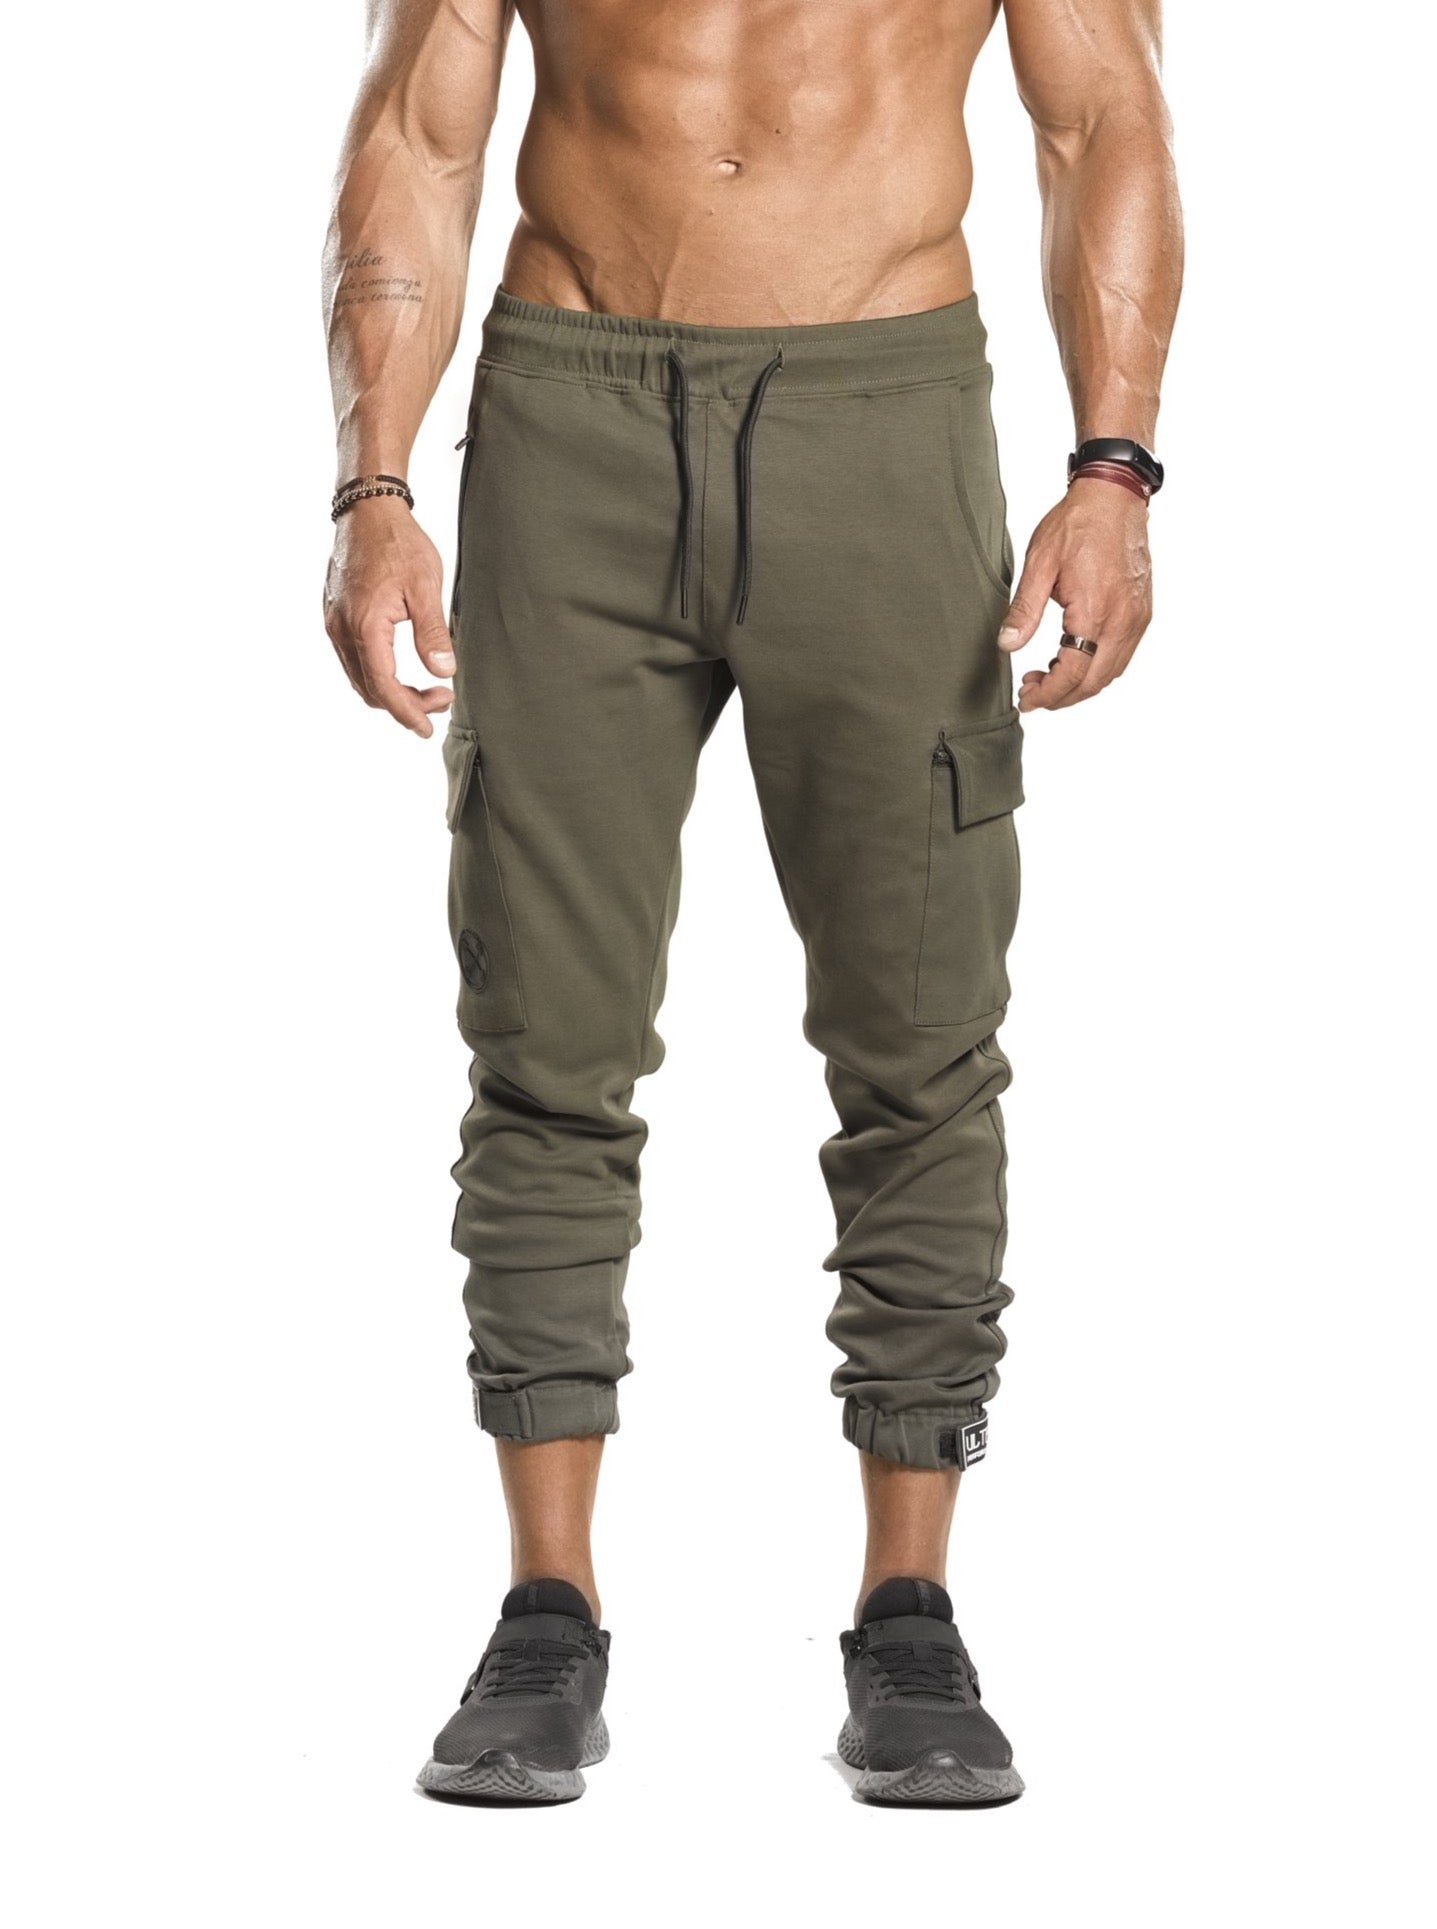 Cargo Joggers - ULTRA Perform-Gear [Olive Green] Very Limited Pieces - Sweatpants/Joggers - Gym Apparel Egypt